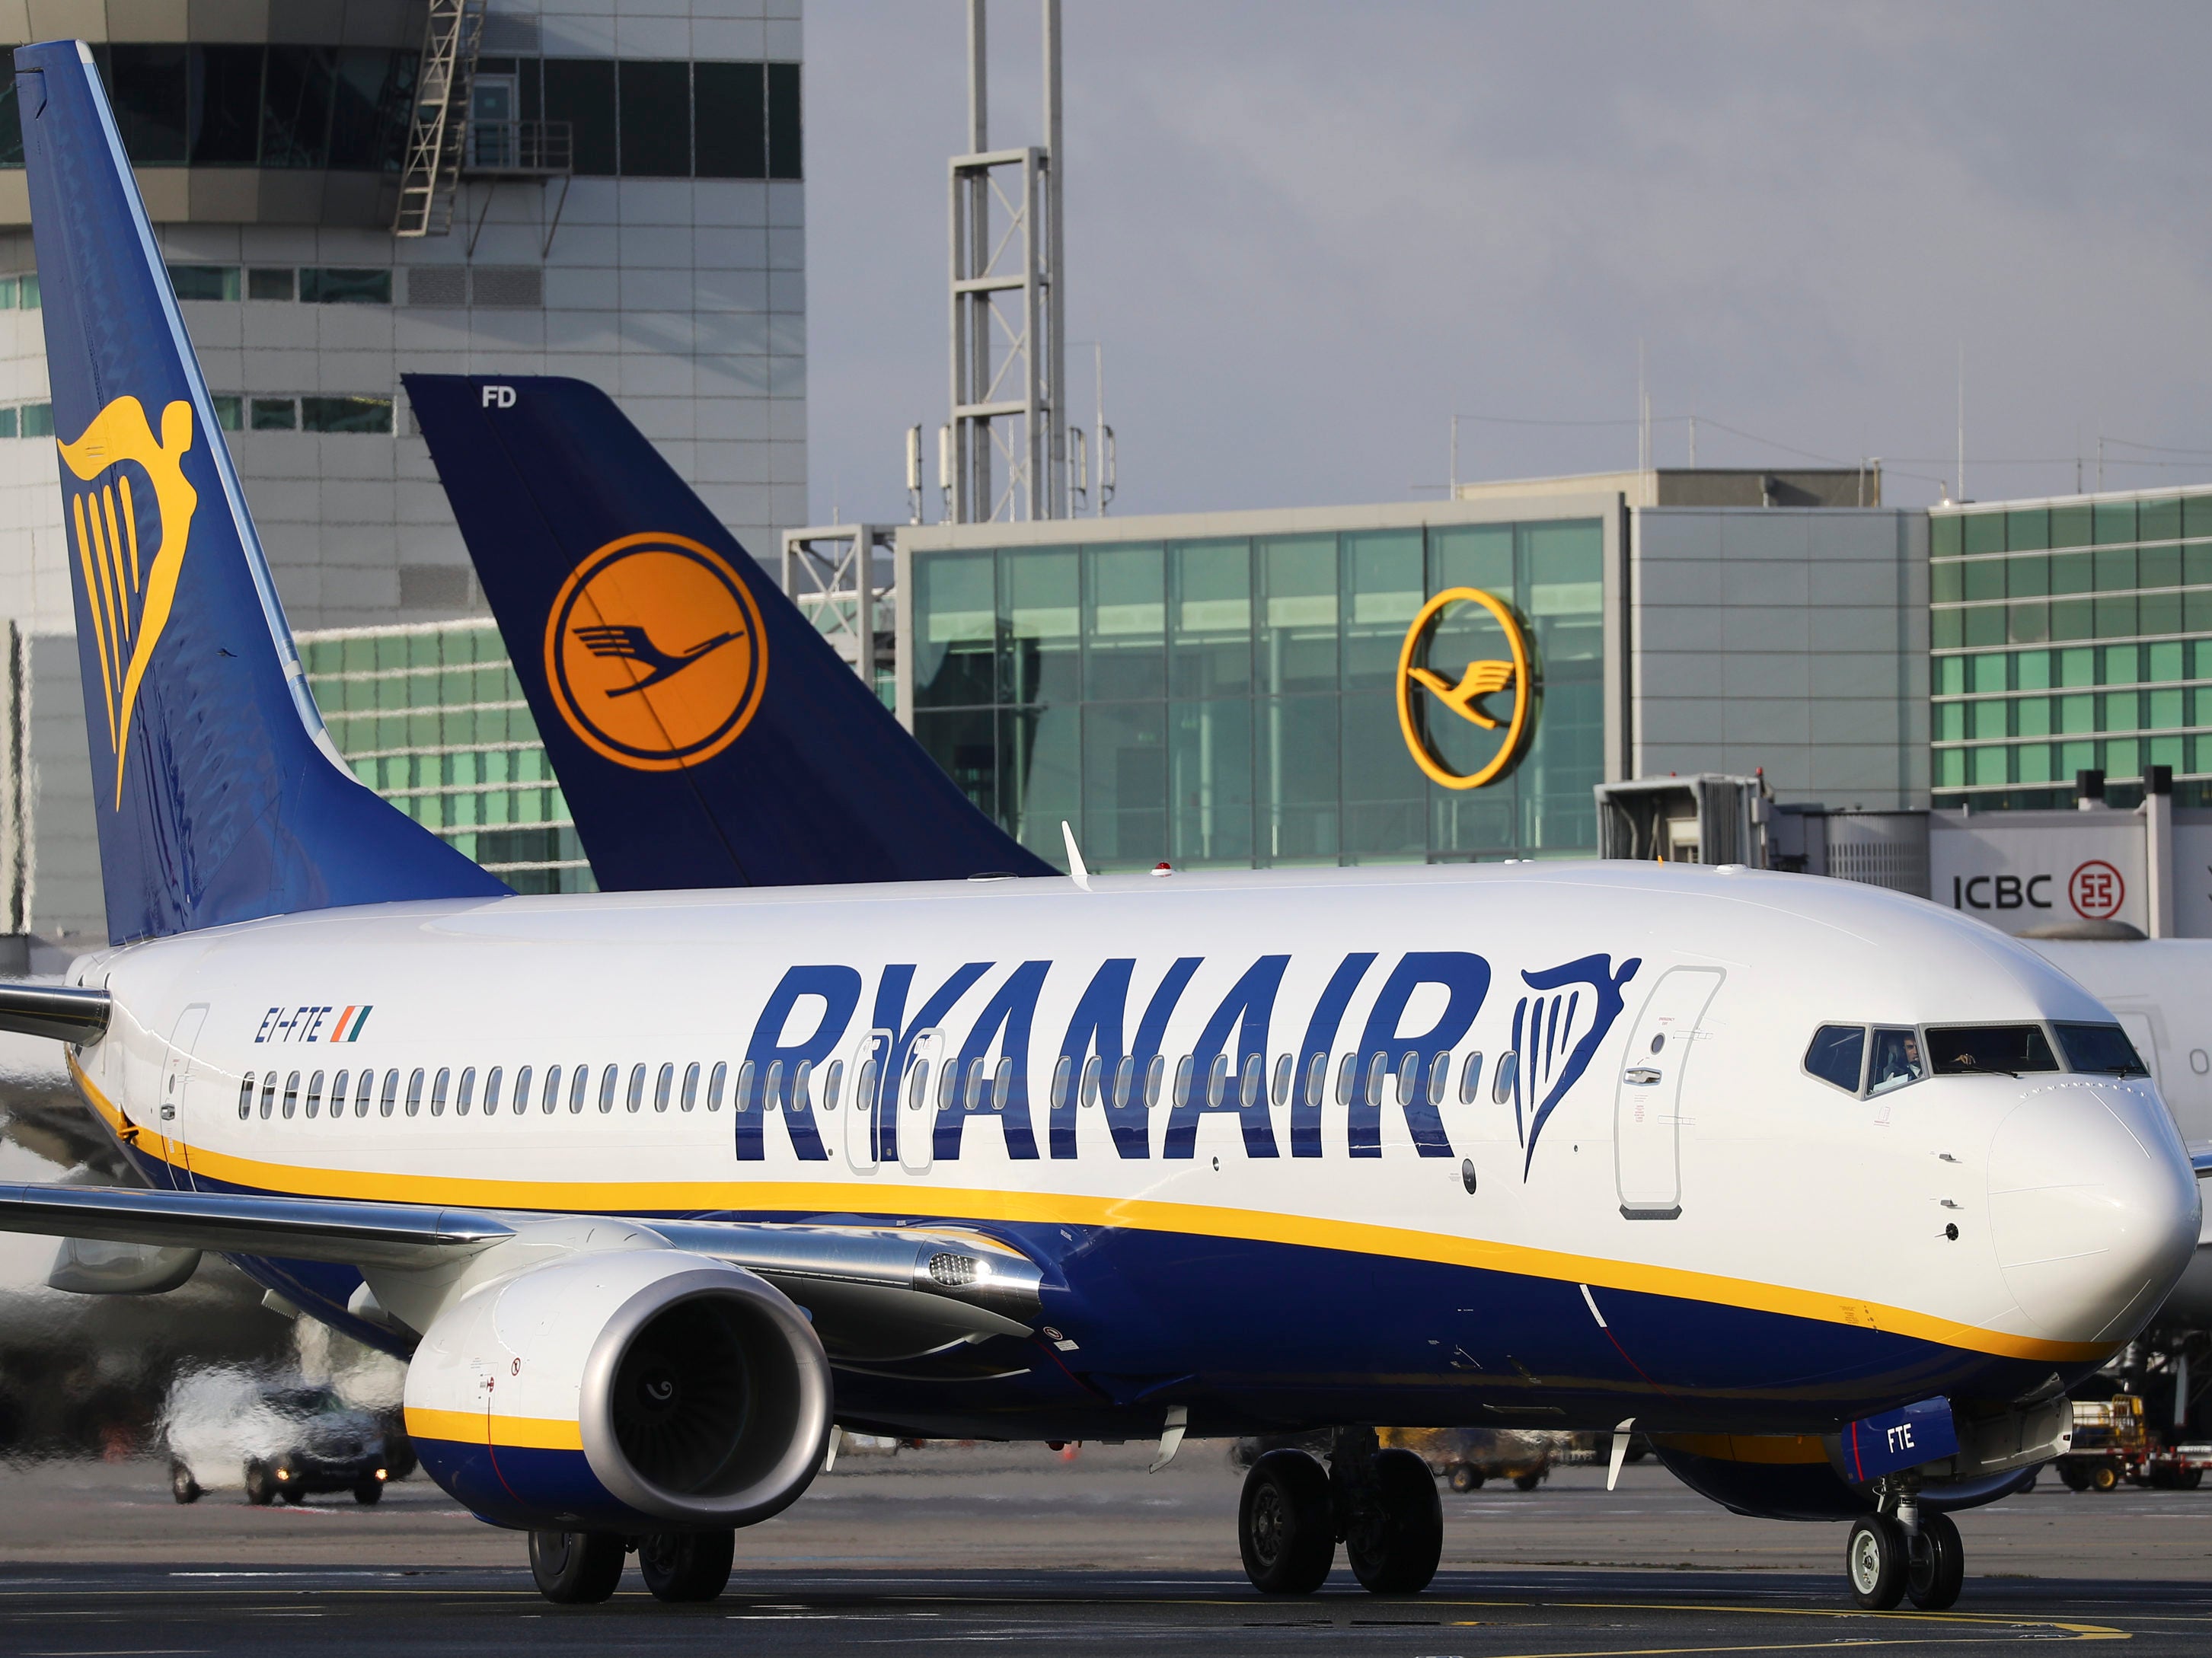 Judge rejects Ryanair bid to unmask pilot sources used in Channel 4 Dispatches report